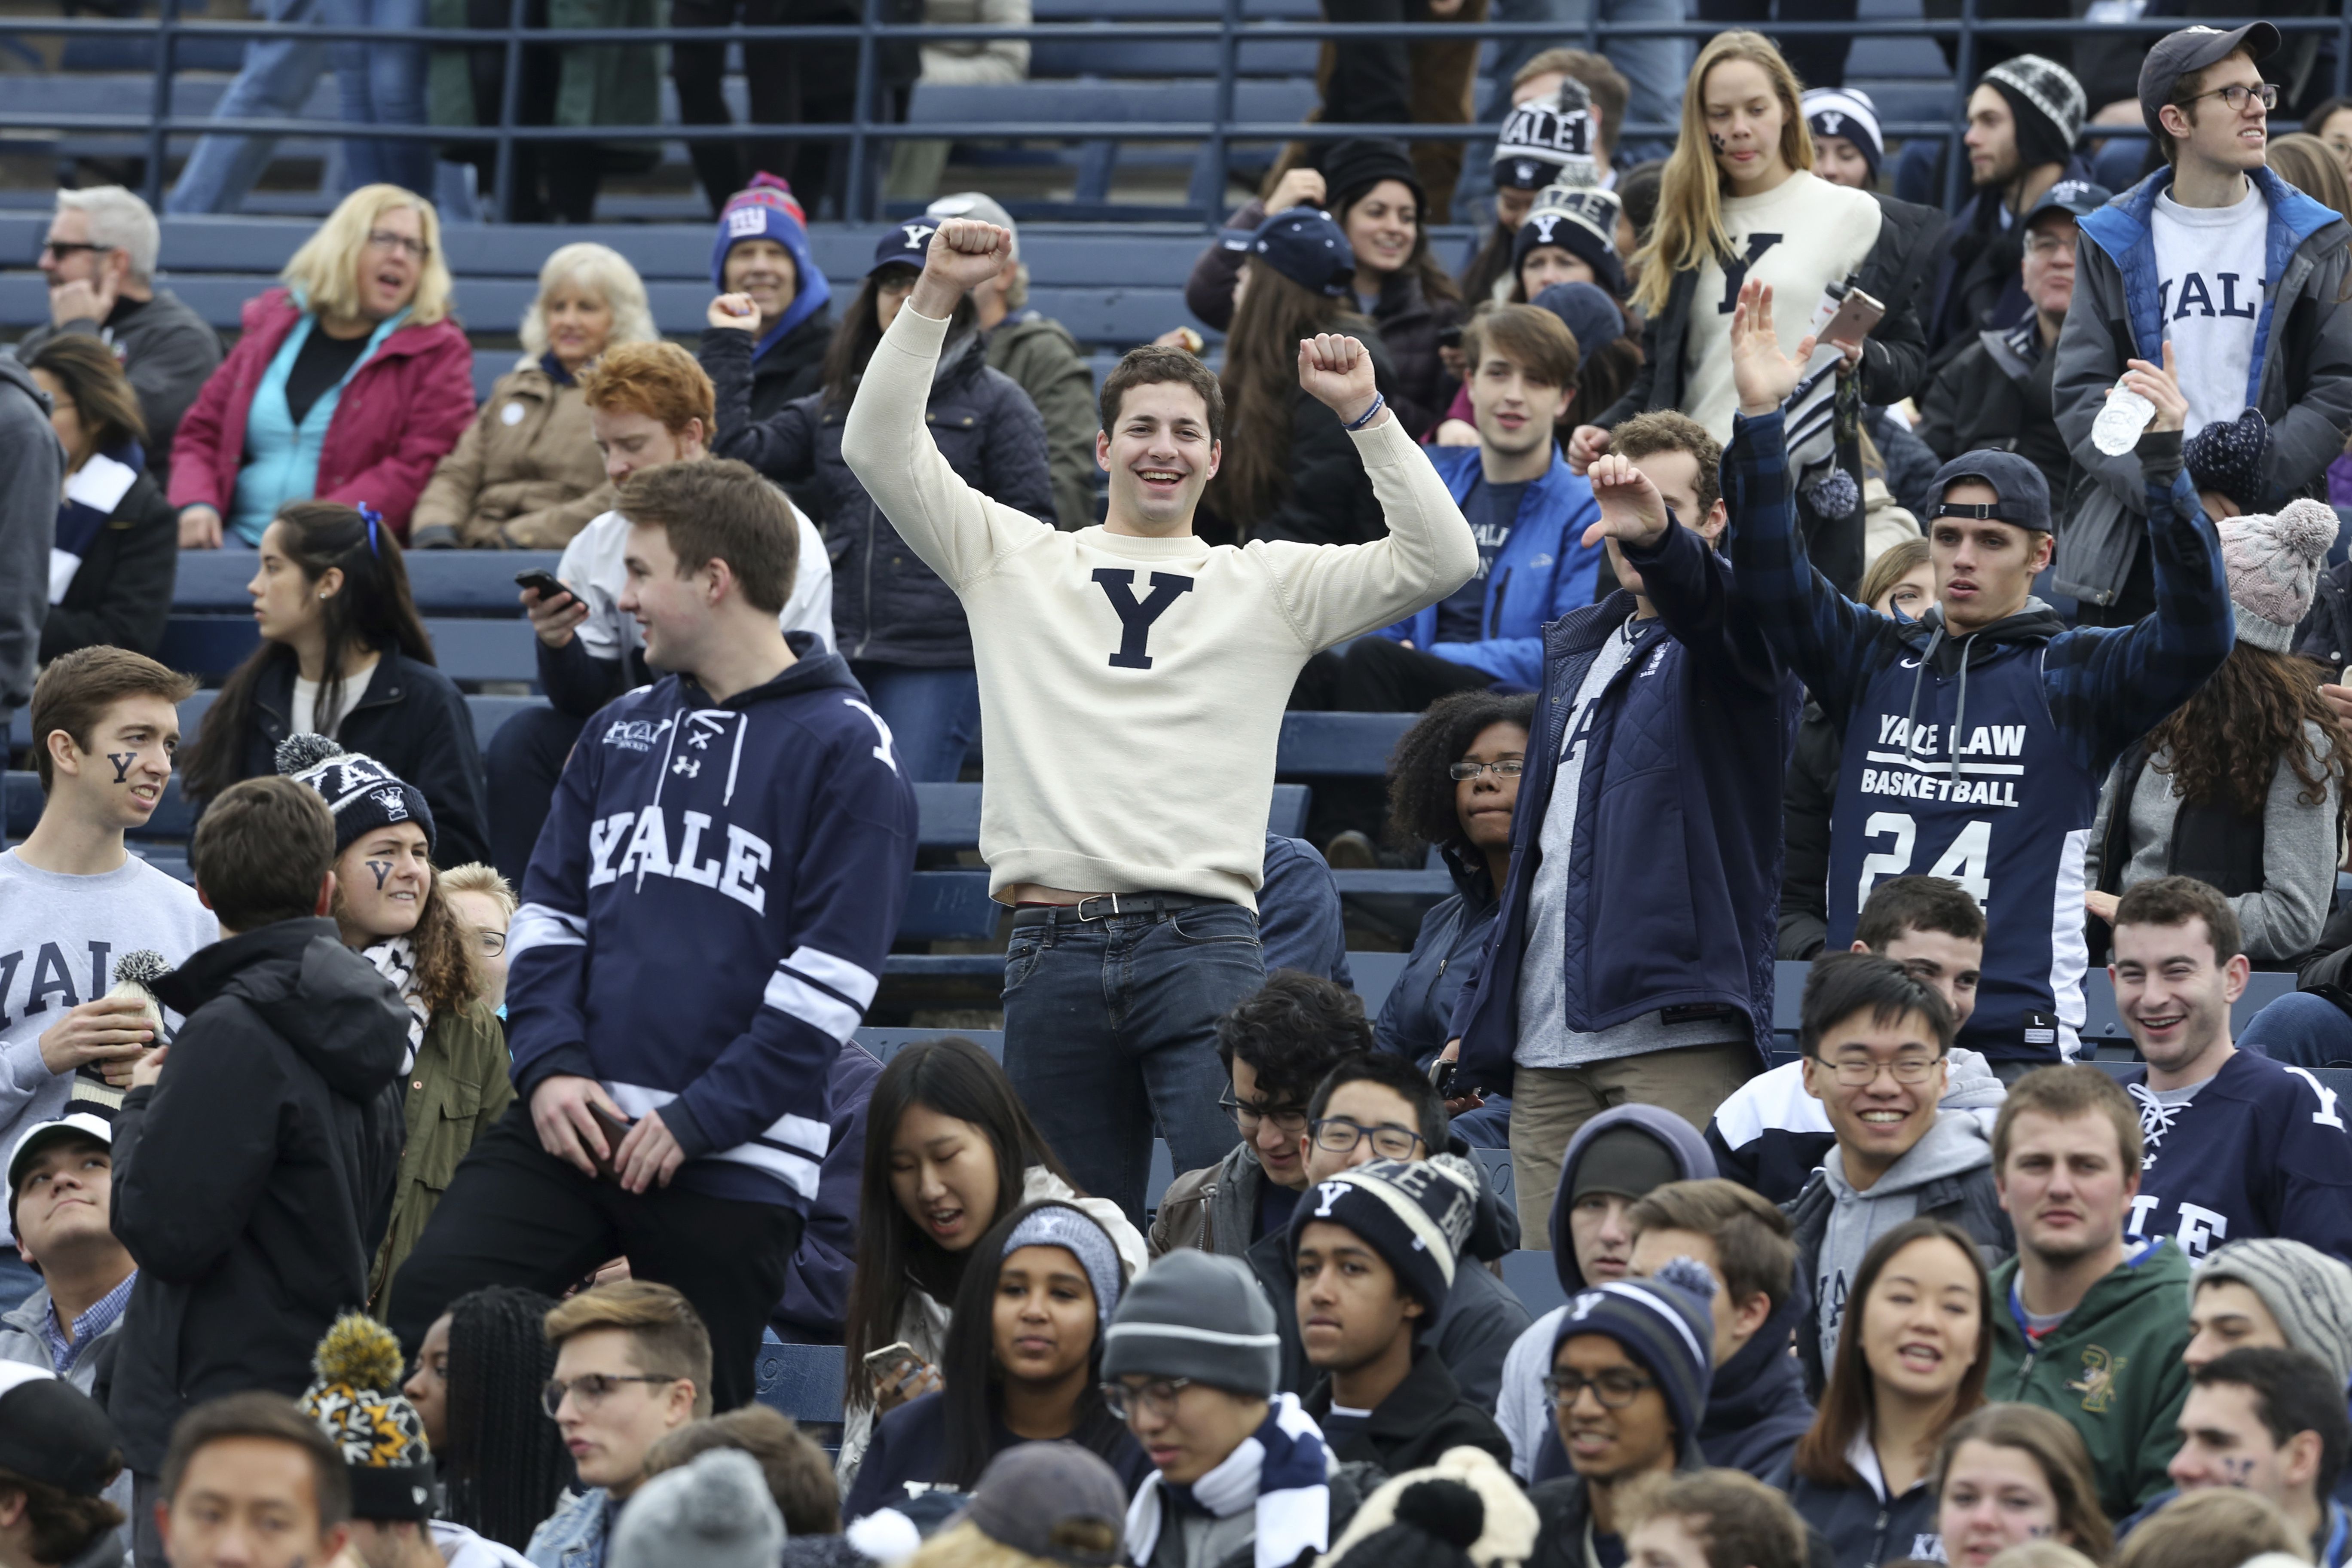 How to watch Harvard-Yale football: Stream 'The Game' live on